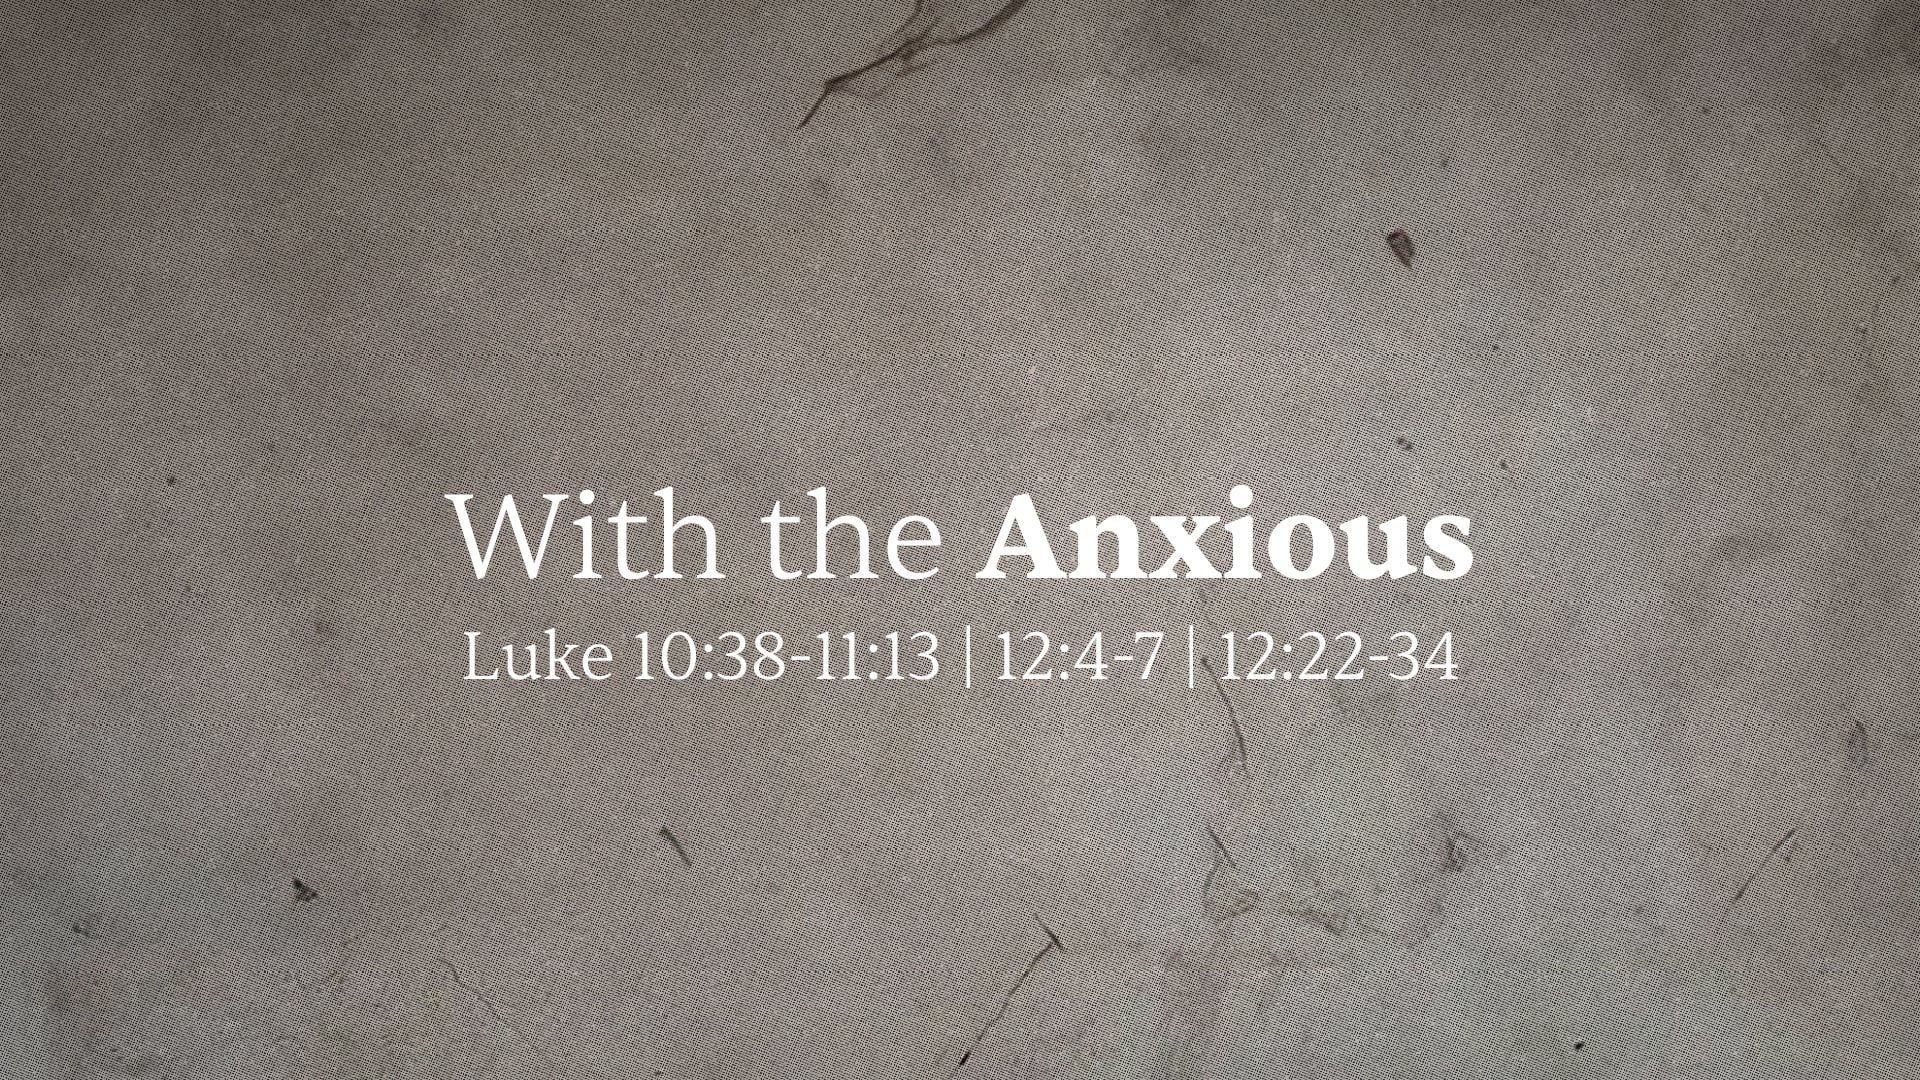 With the Anxious